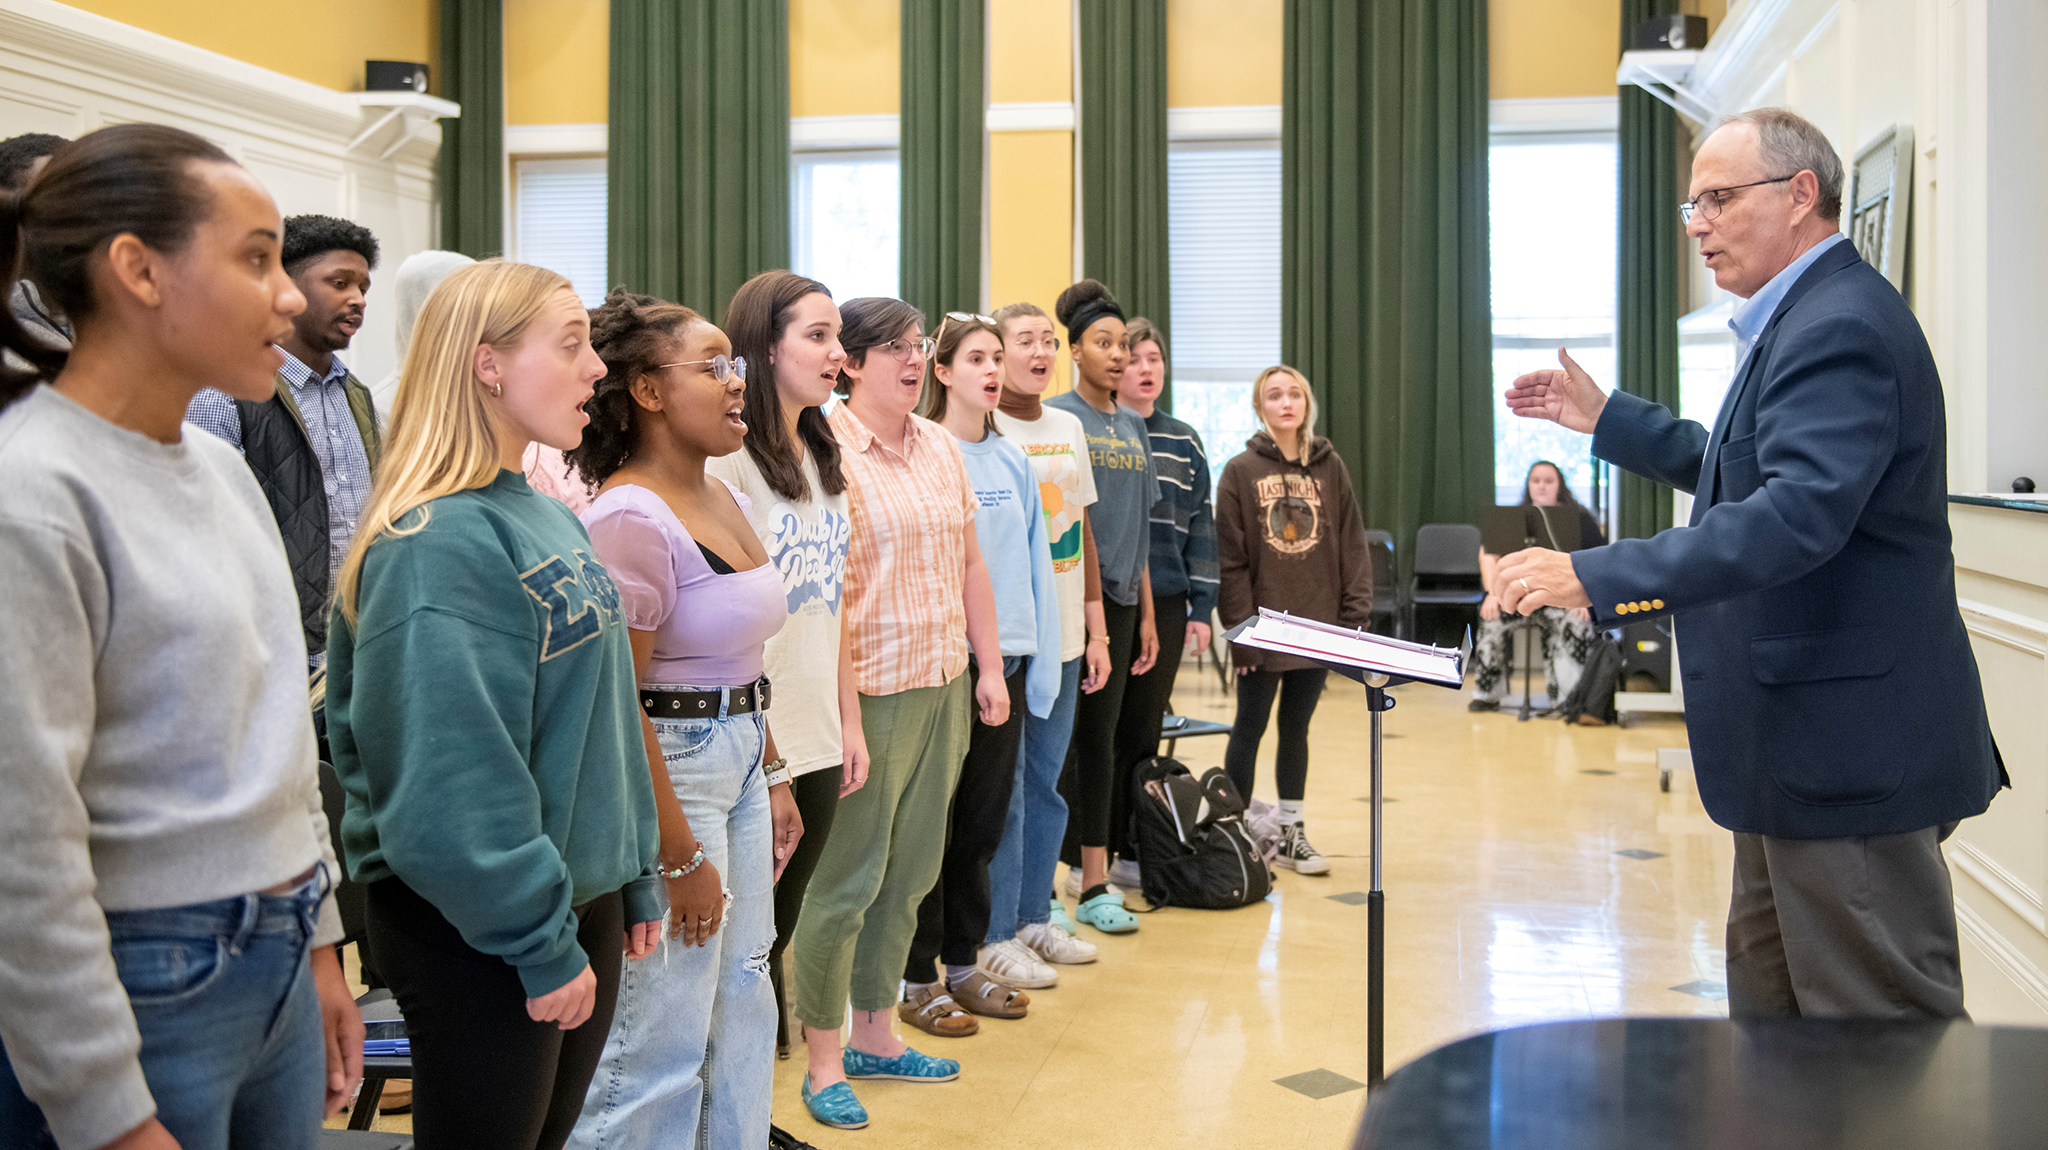 The UM Concert Singers rehearse numbers for their European tour, where they will sing in historic cathedrals and give a special memorial performance at Omaha Beach. The 10-day tour, set for May 17-27, includes multiple stops in Belgium and France. Photo by Sri Chattopadhyay/Ole Miss Digital Imaging Services